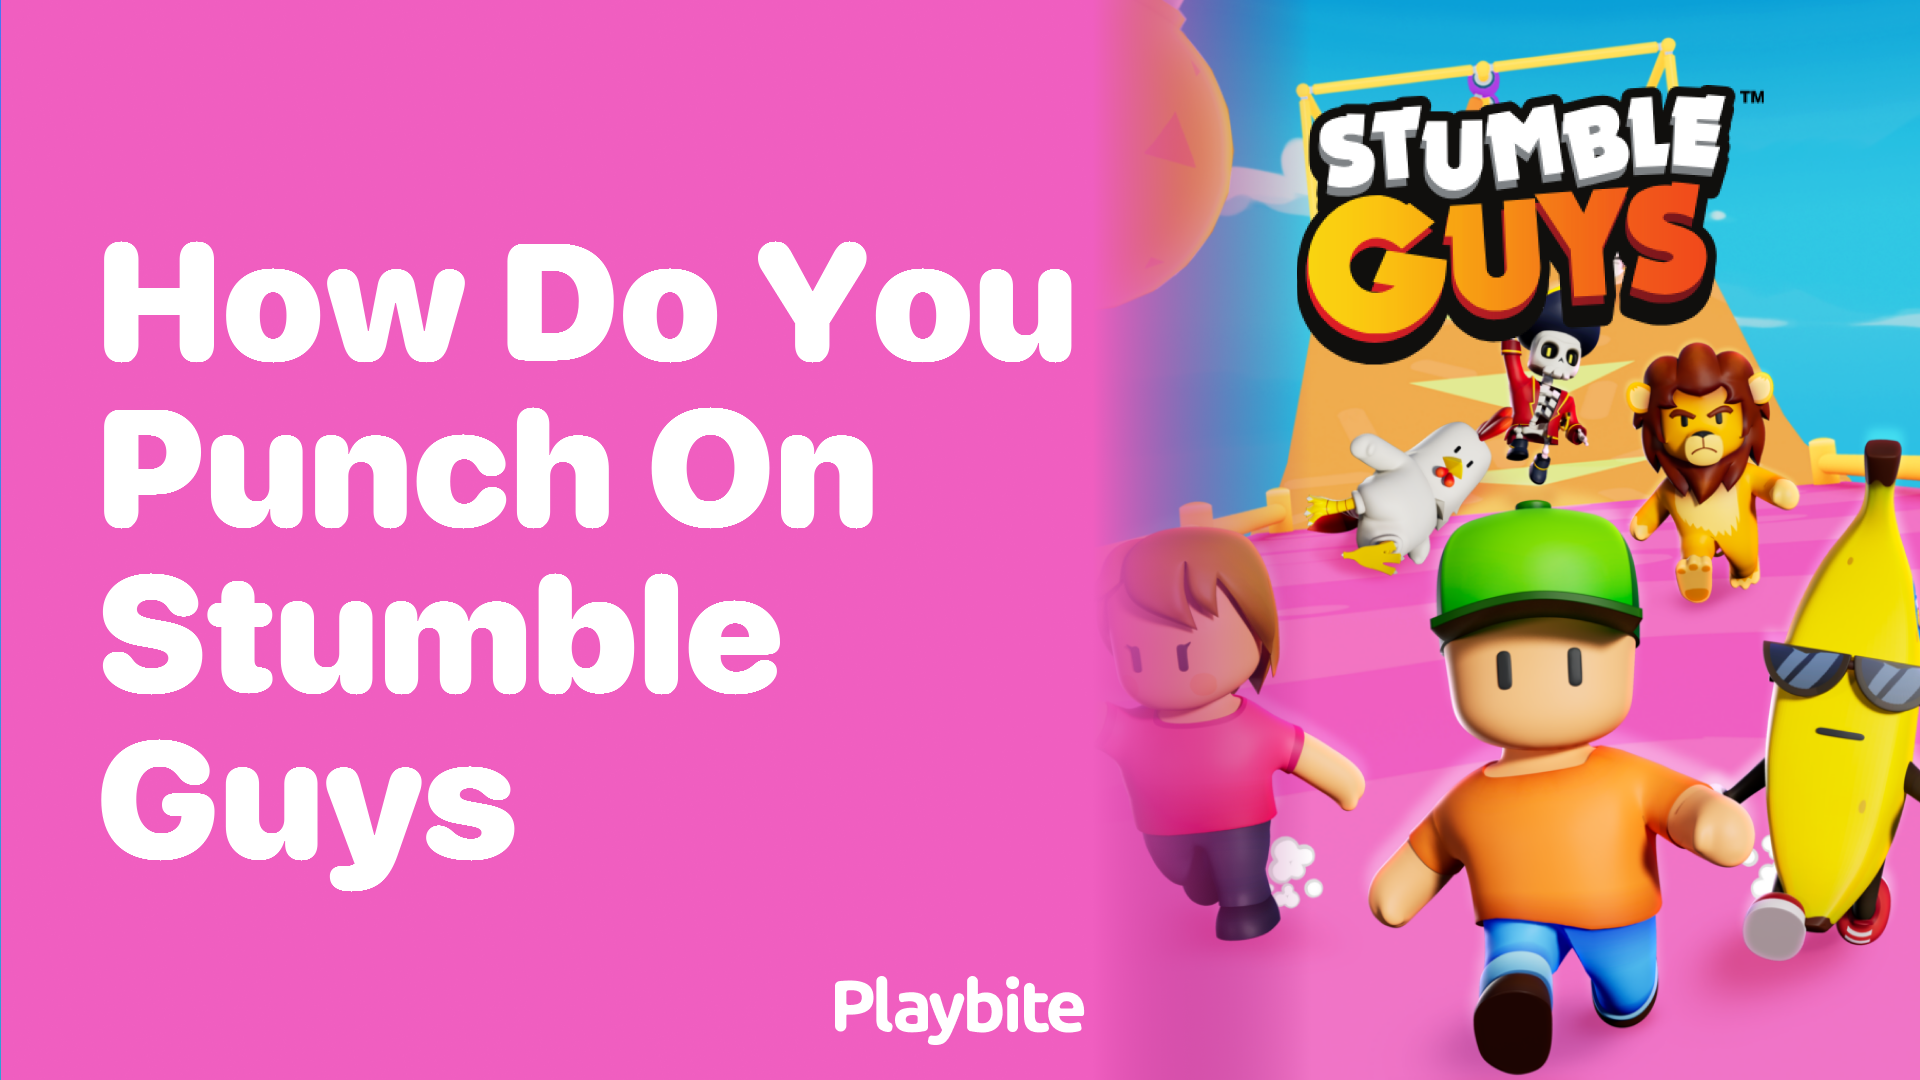 How Do You Punch on Stumble Guys?